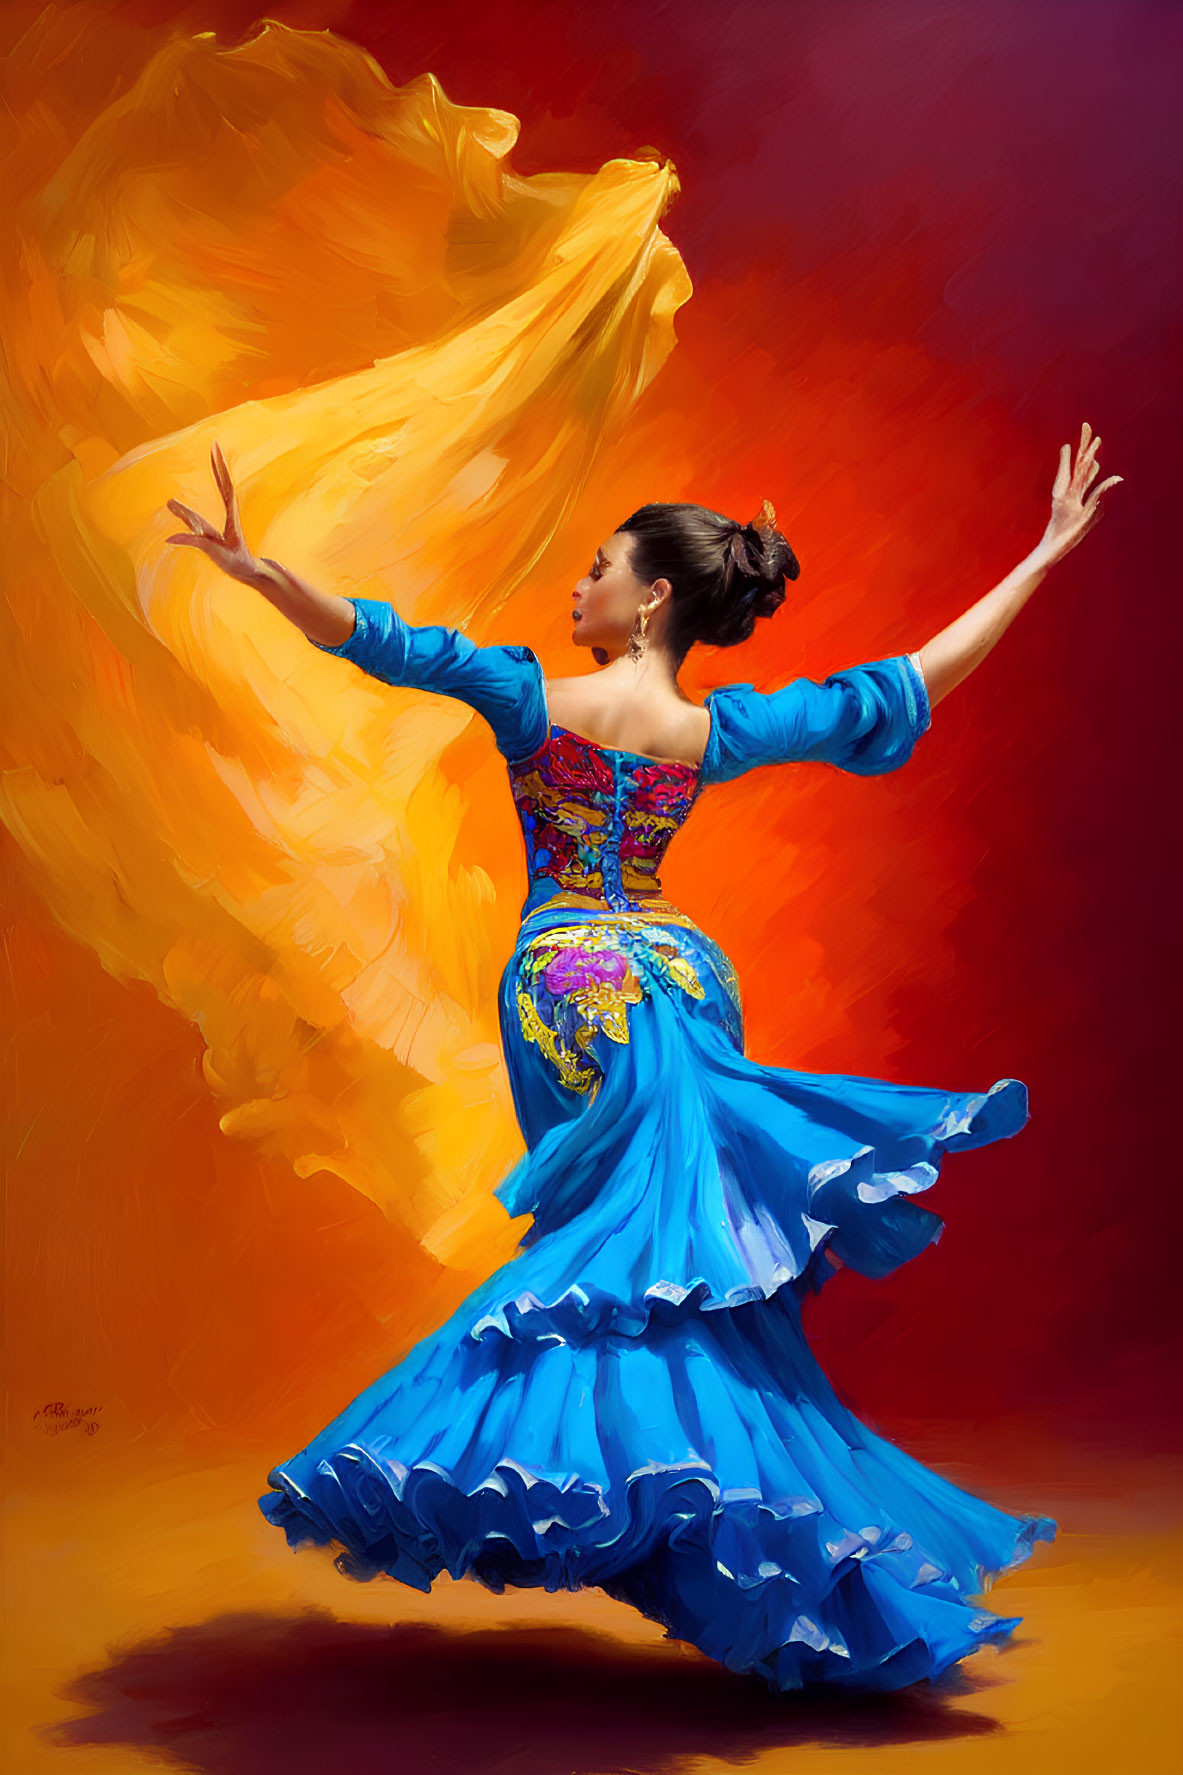 Vibrant blue flamenco dress on woman dancing against red-yellow gradient